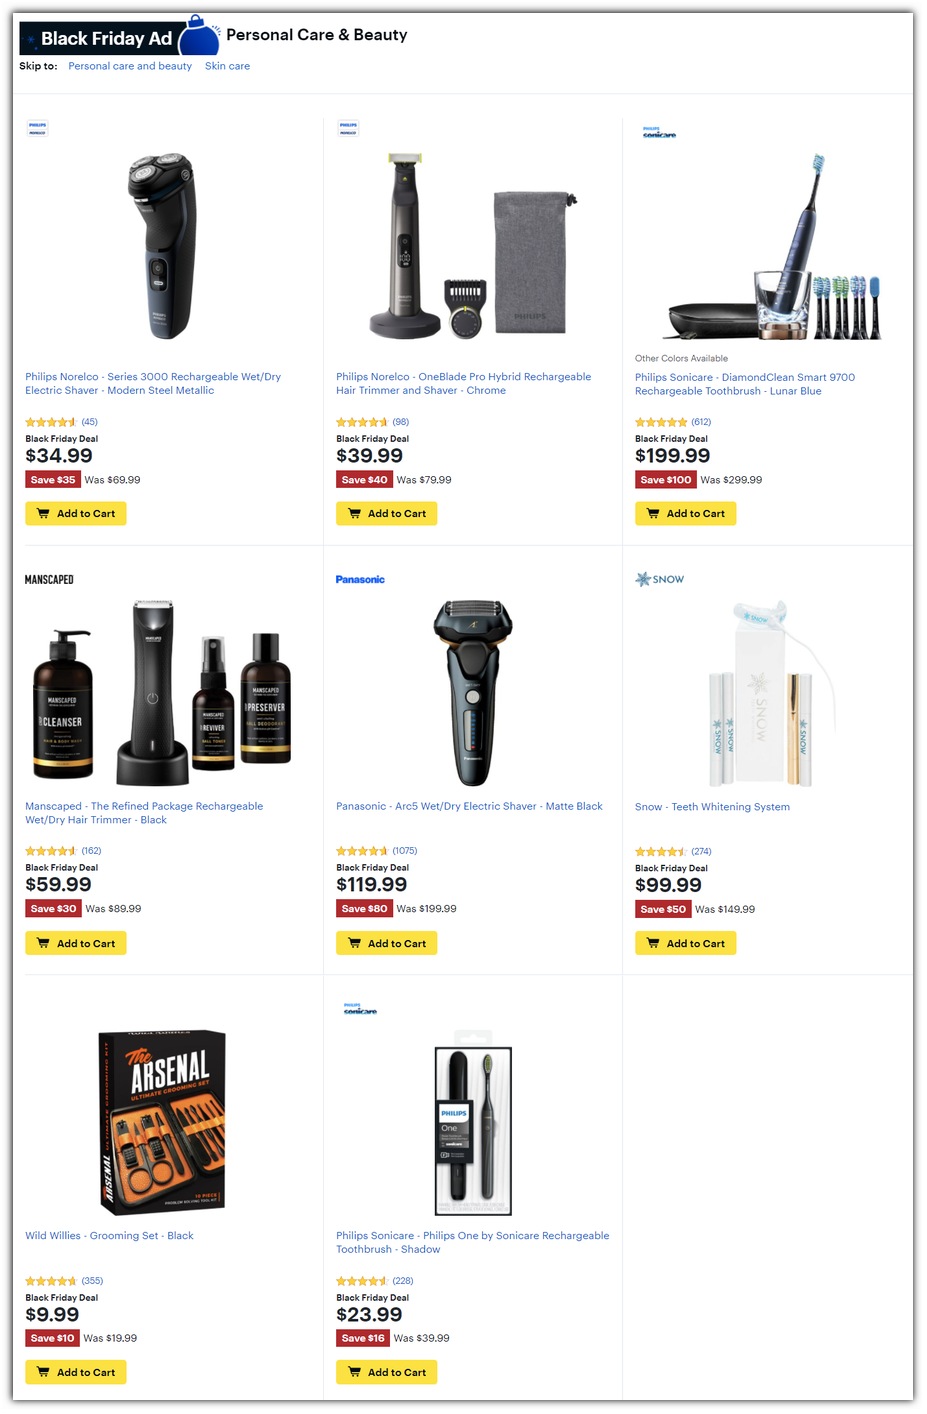 Shavers / Personal Care